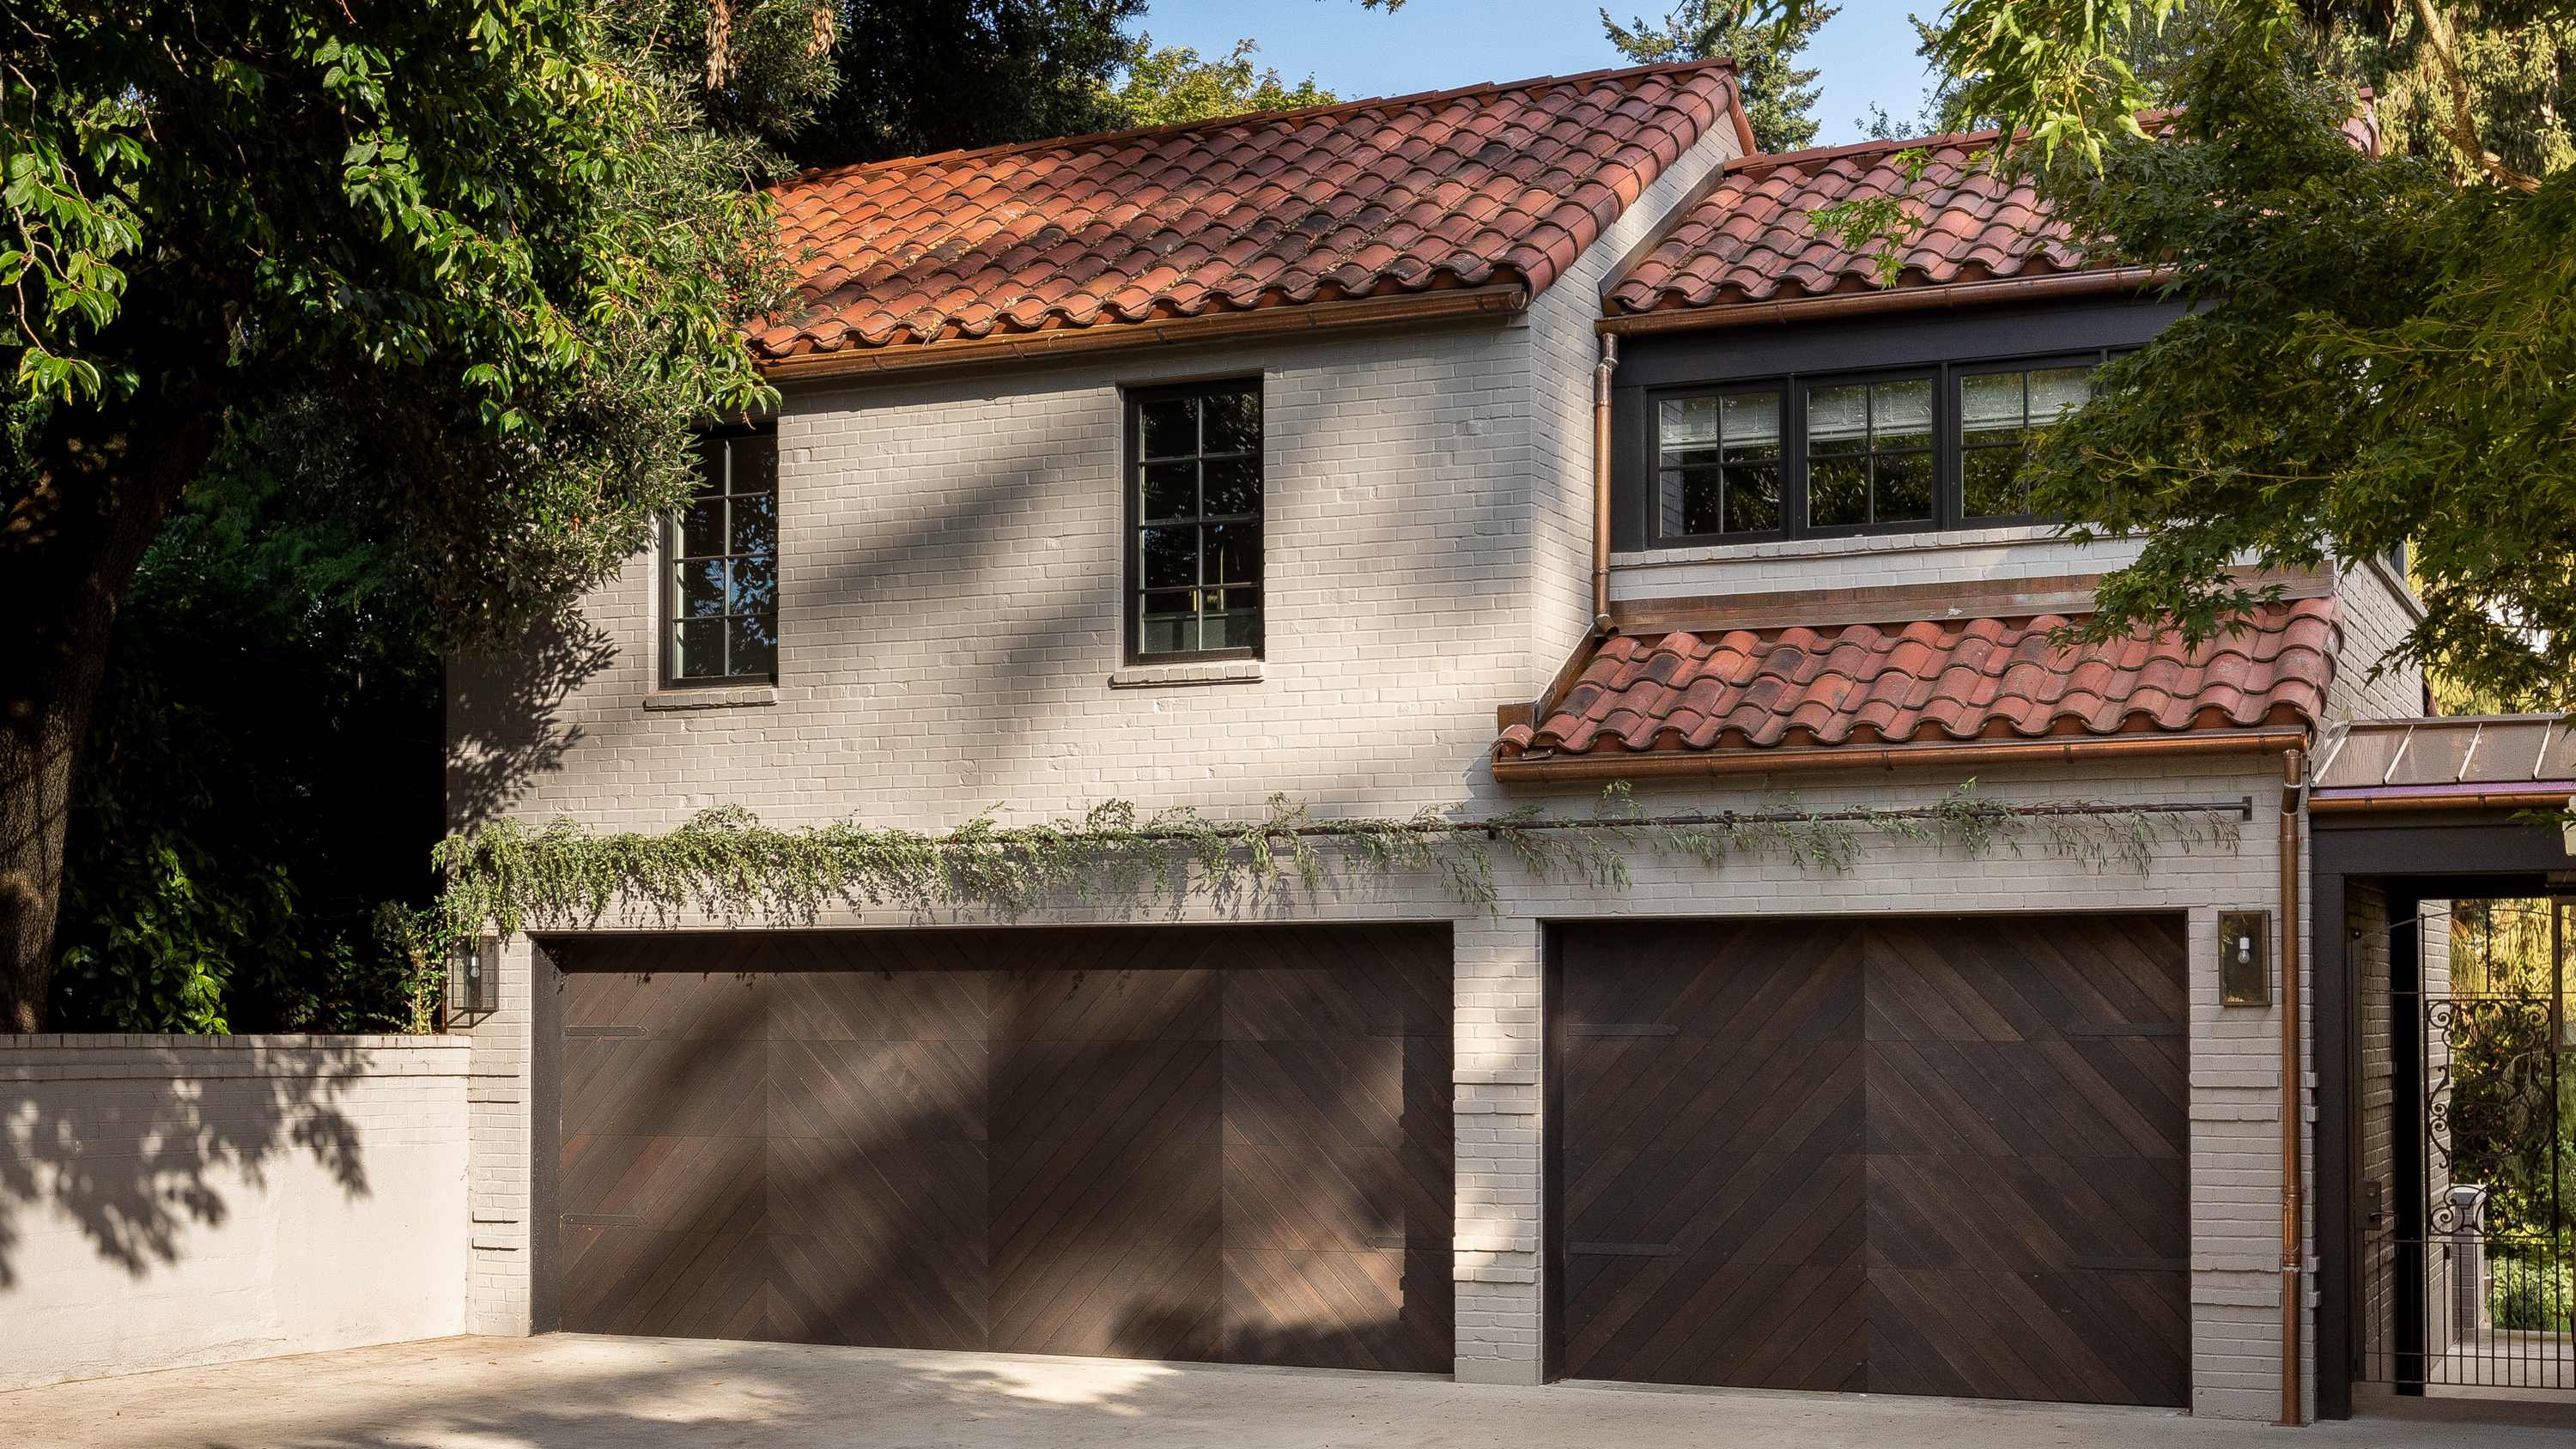 The exterior of the home remains mostly classic, while the addition above the garage introduces new materiality, blending modern modular elements with the classic architecture.